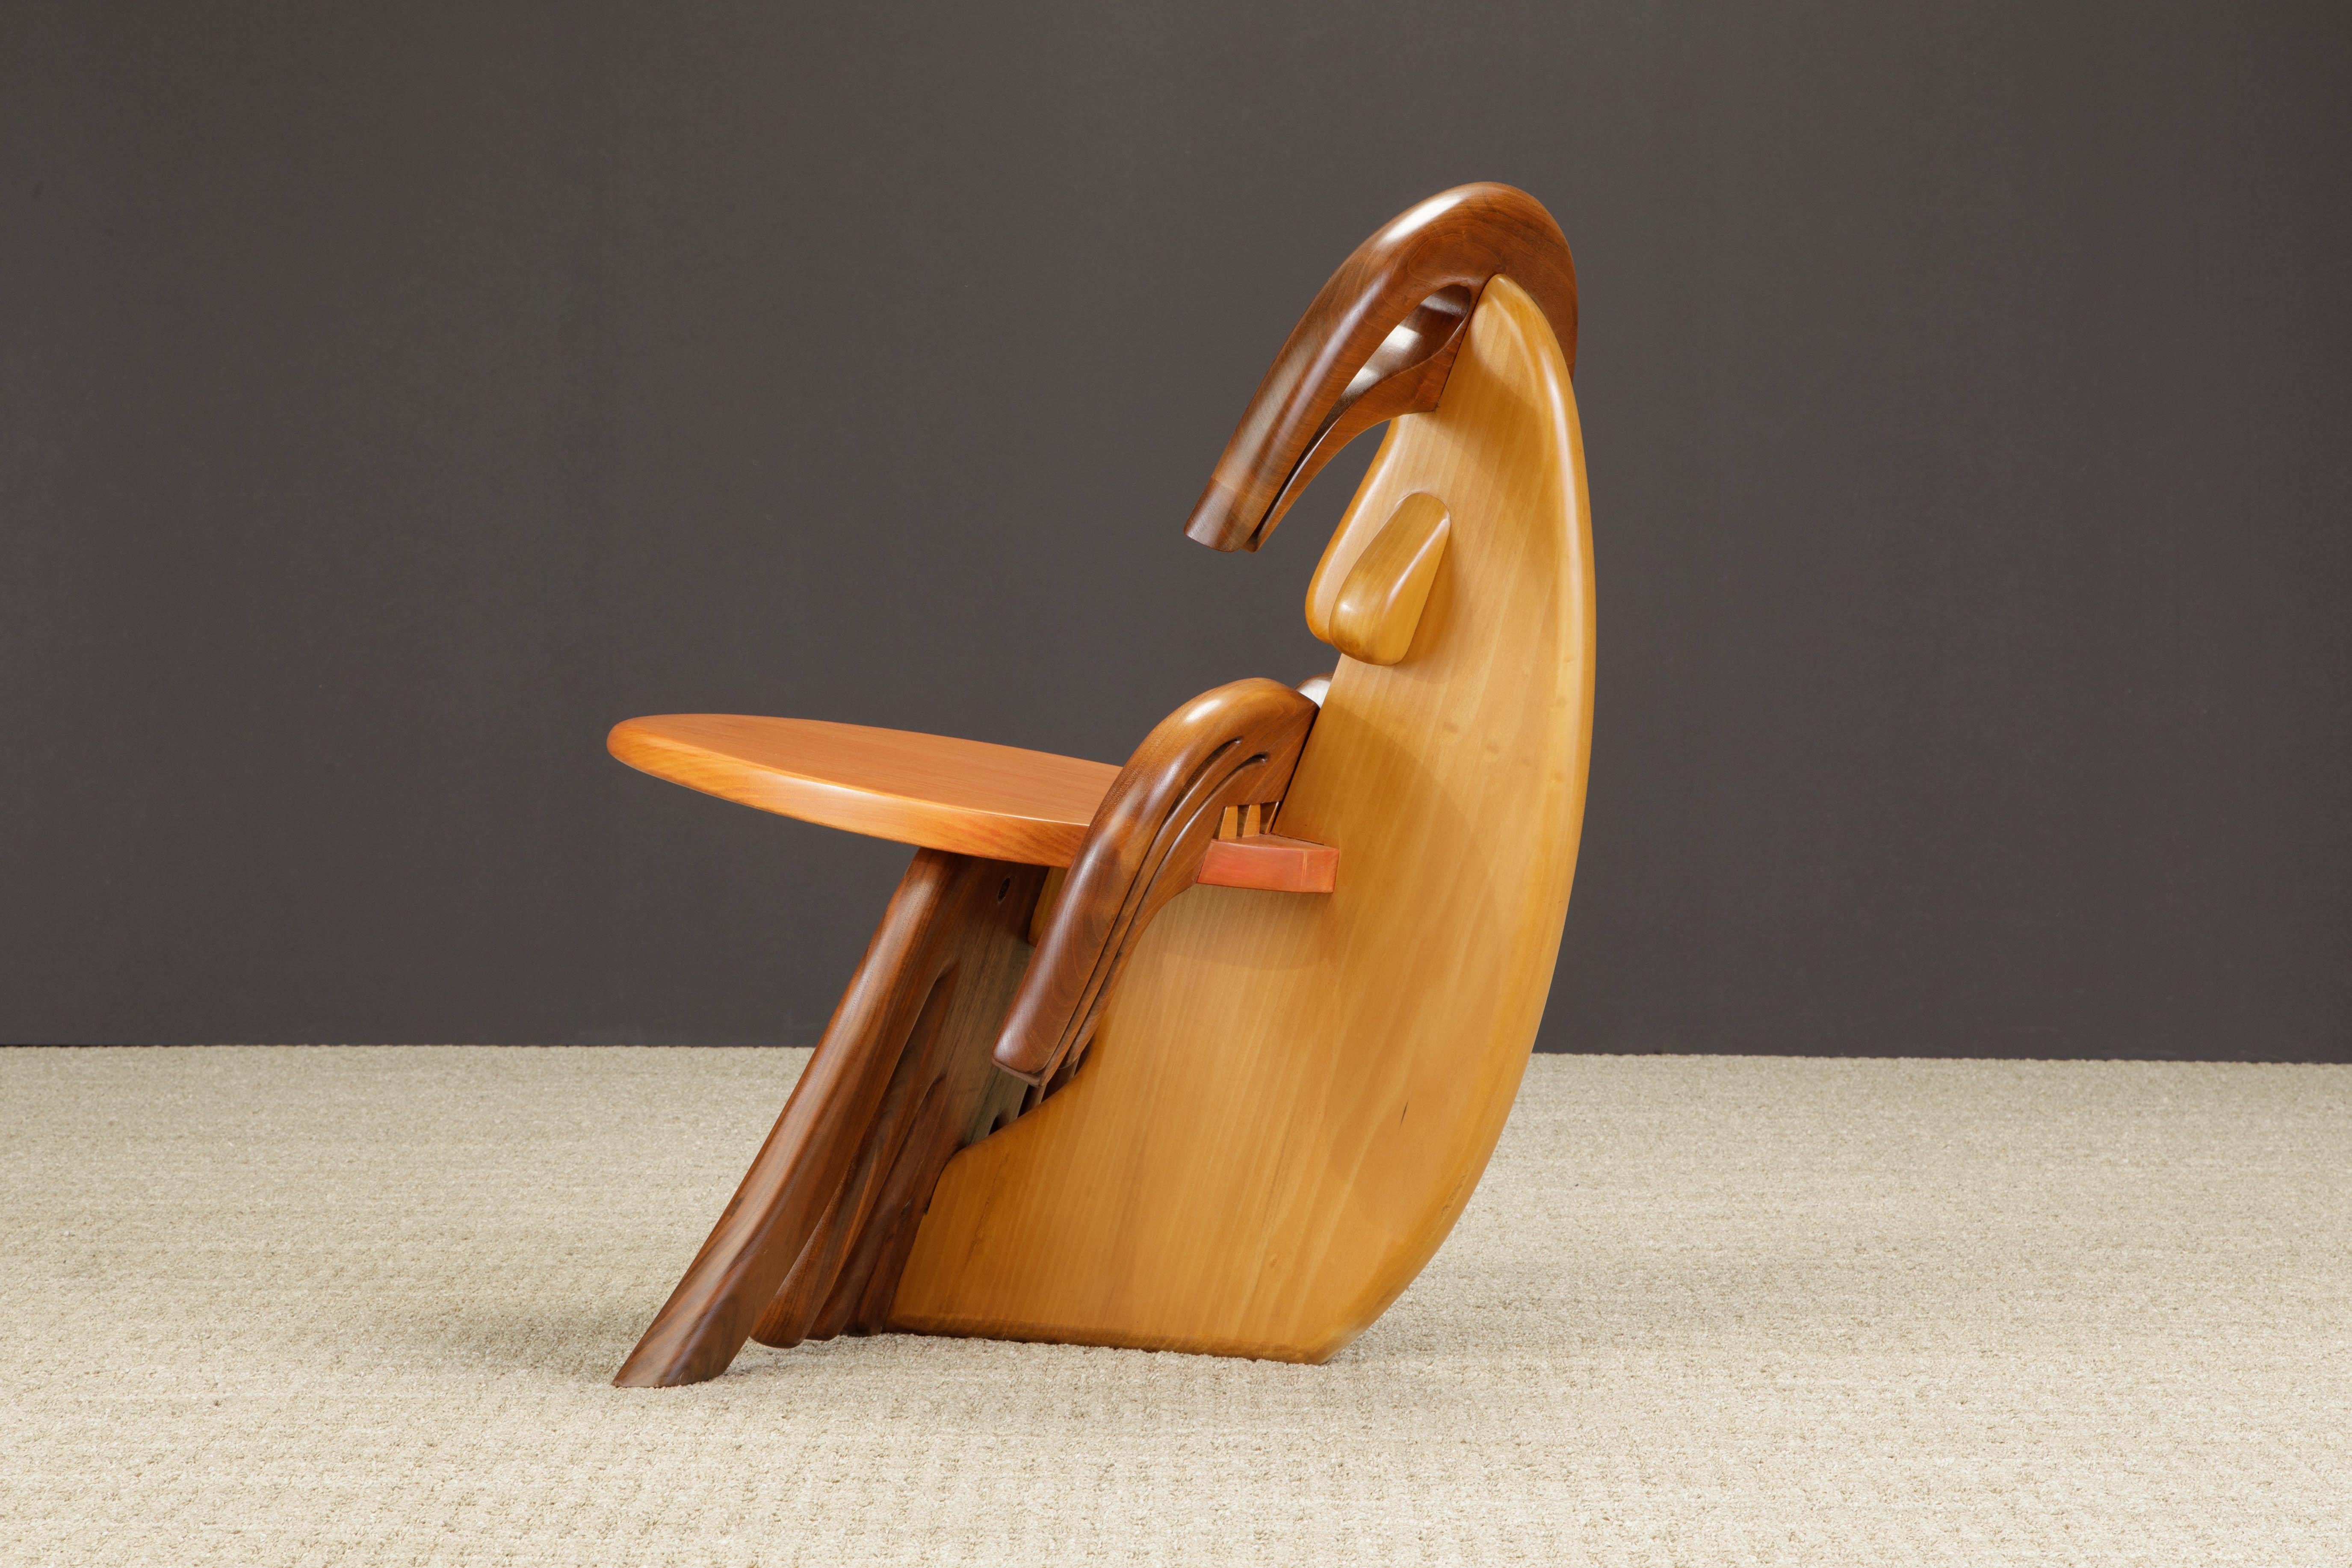 Alan Siegel Post-Modern Craftsman 'Tongue' Chair, Signed & Dated 1981  For Sale 7